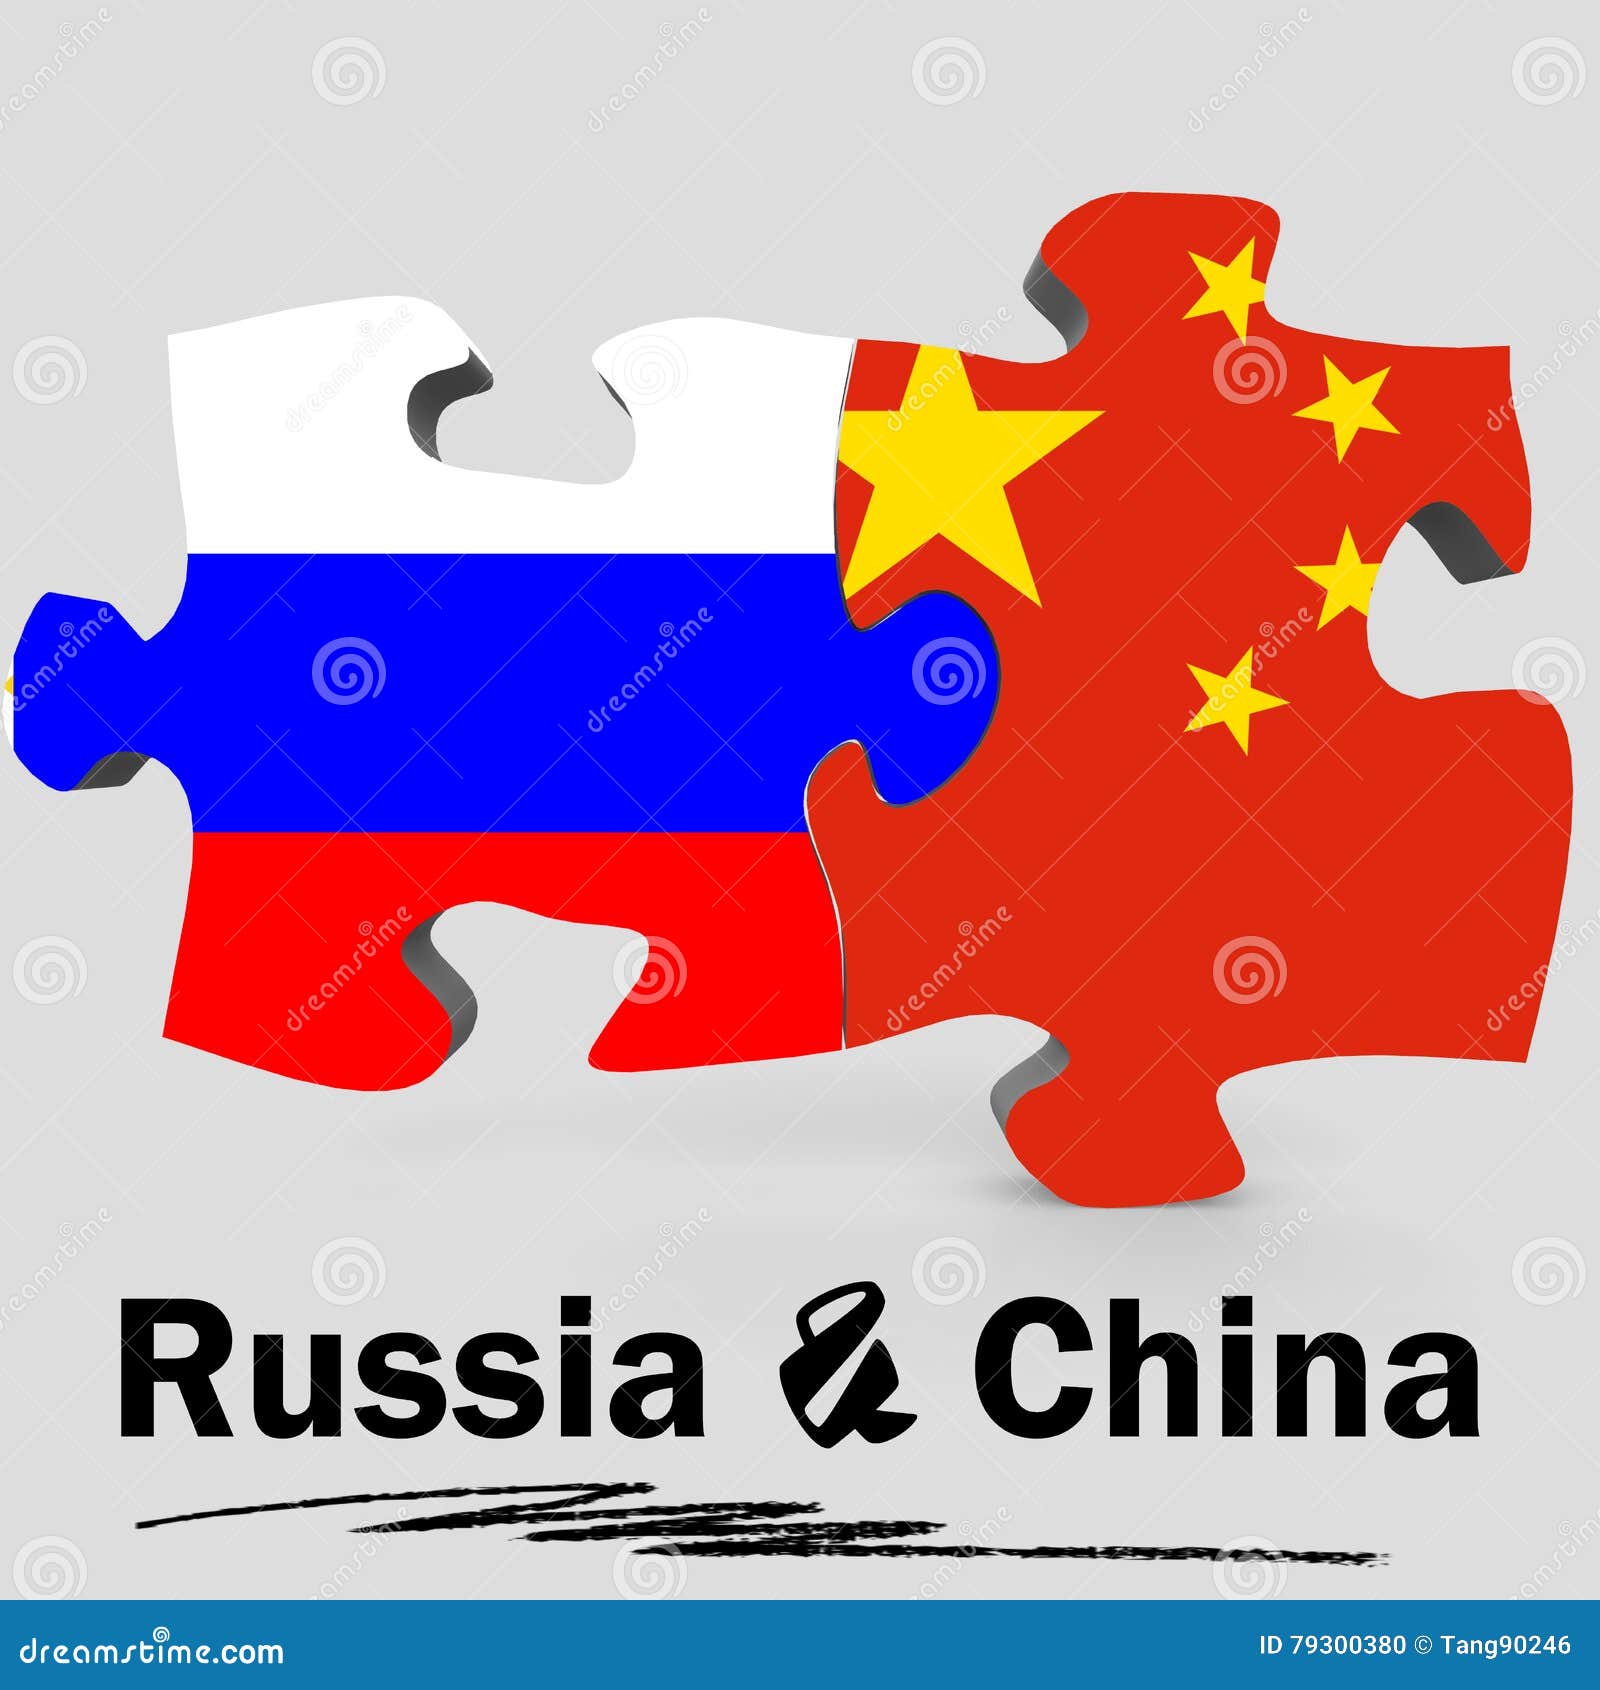 china-russia-flags-puzzle-isolated-white-background-d-rendering-79300380.jpg